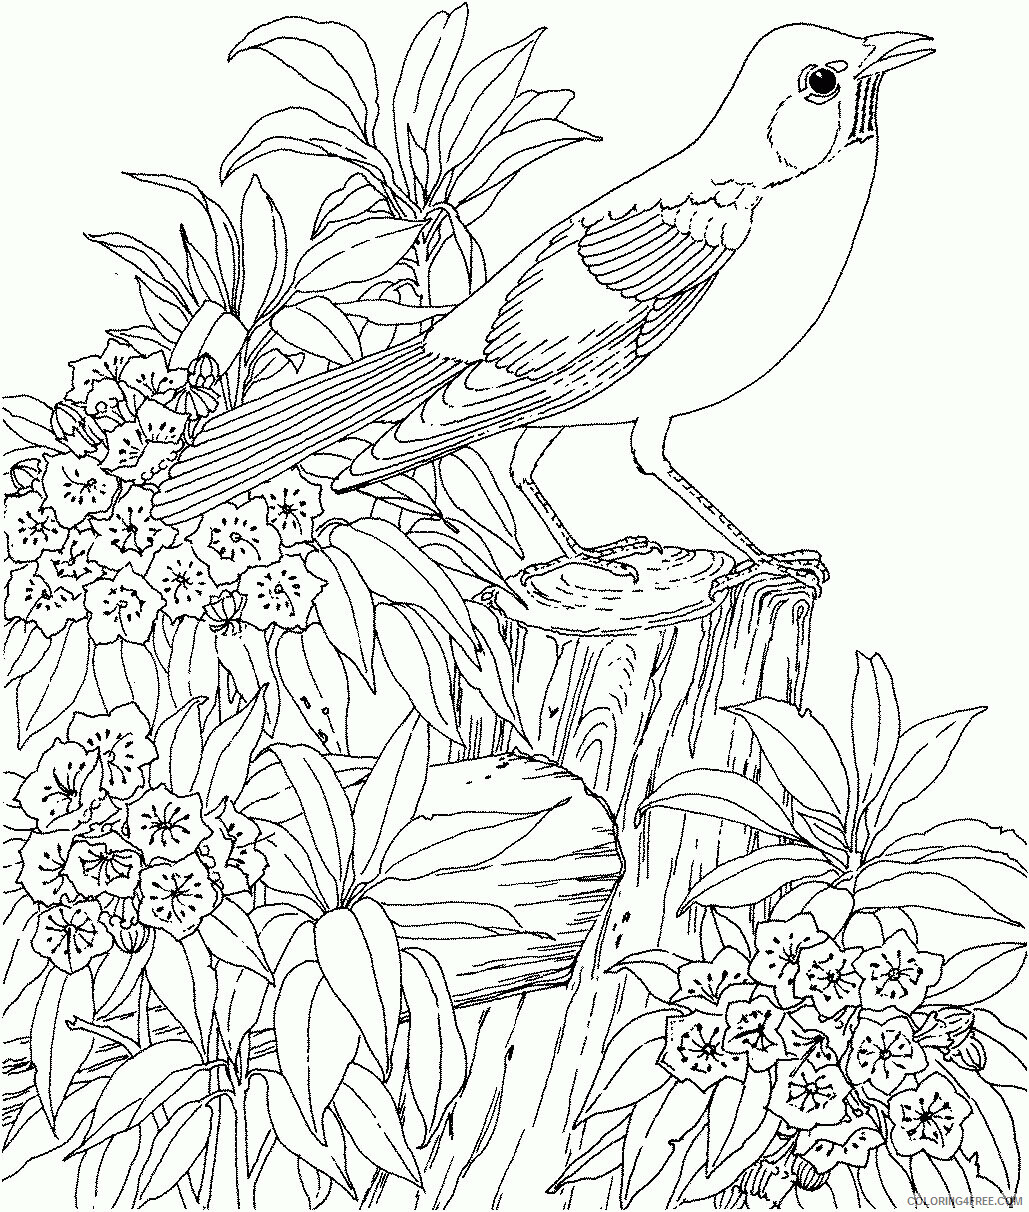 Animal Coloring Pages for Teens Printable Sheets for teenagers difficult 2021 a 0356 Coloring4free